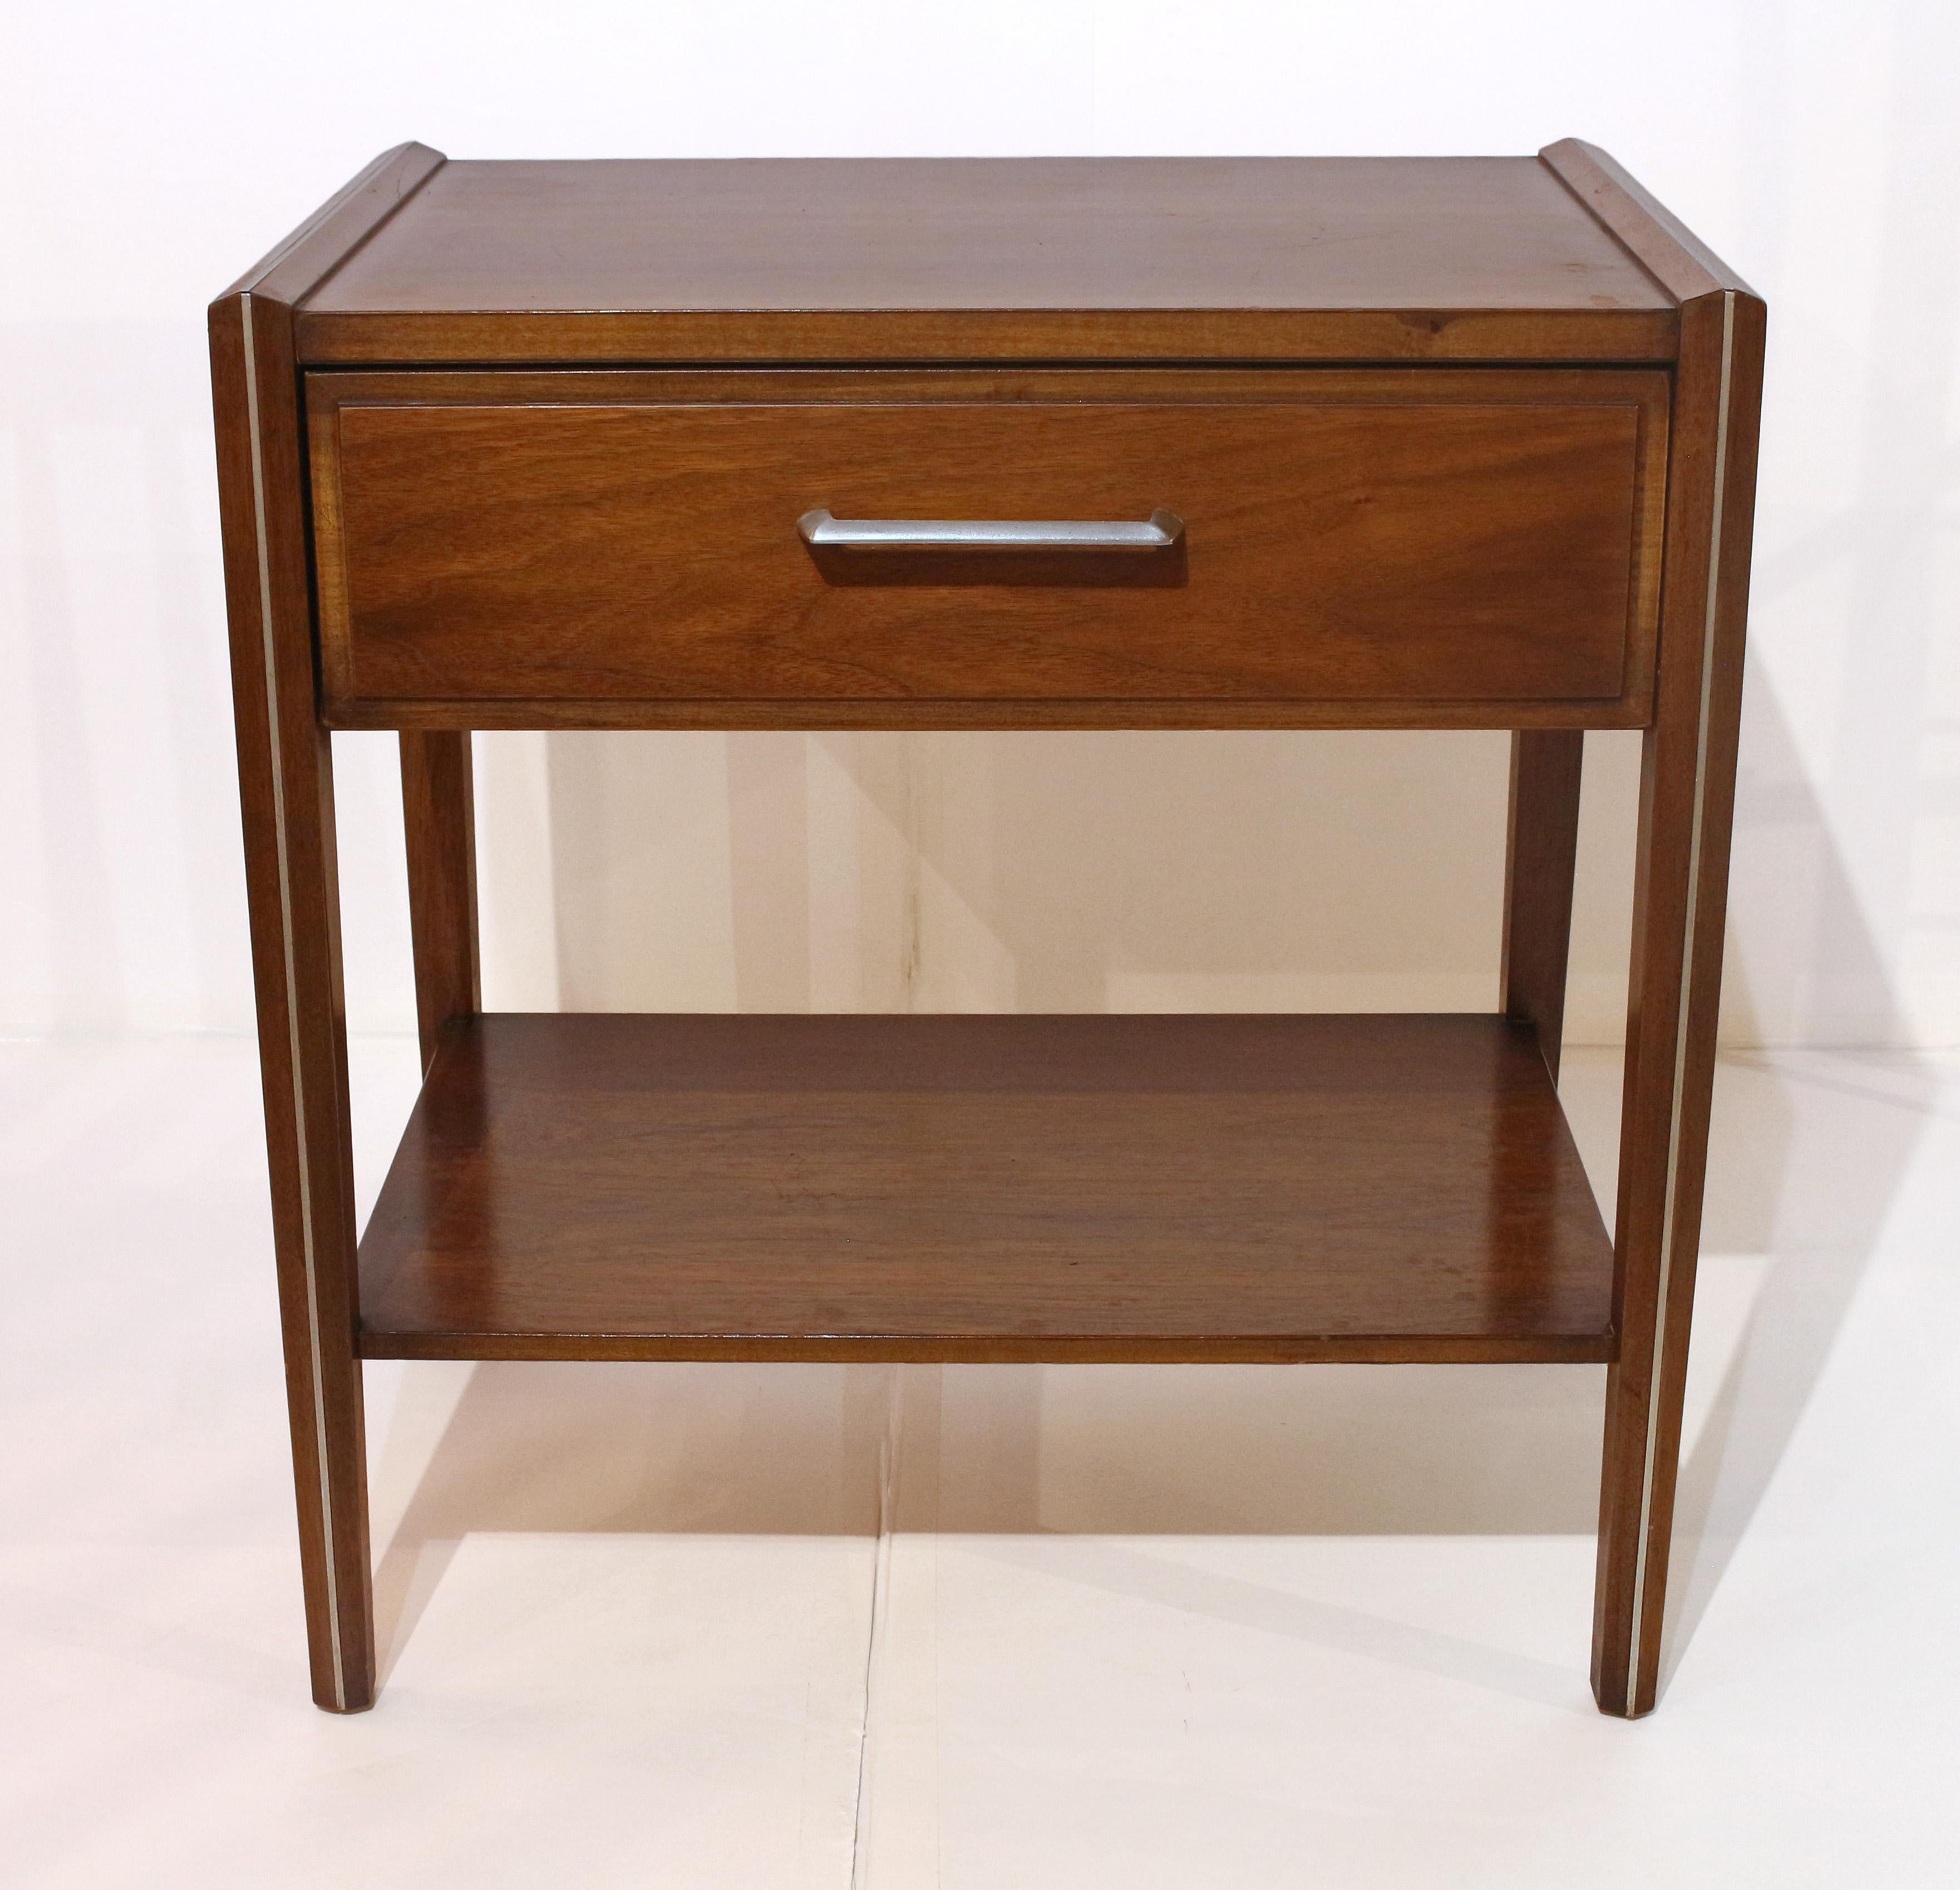 Mid-Century Modern single drawer side table with shelf, American, circa 1960s. Brushed chrome & inlaid walnut and walnut veneered; oak secondary wood. Dovetailed drawer. Chamfered side moldings & legs. All original. Lightly cleaned.
22